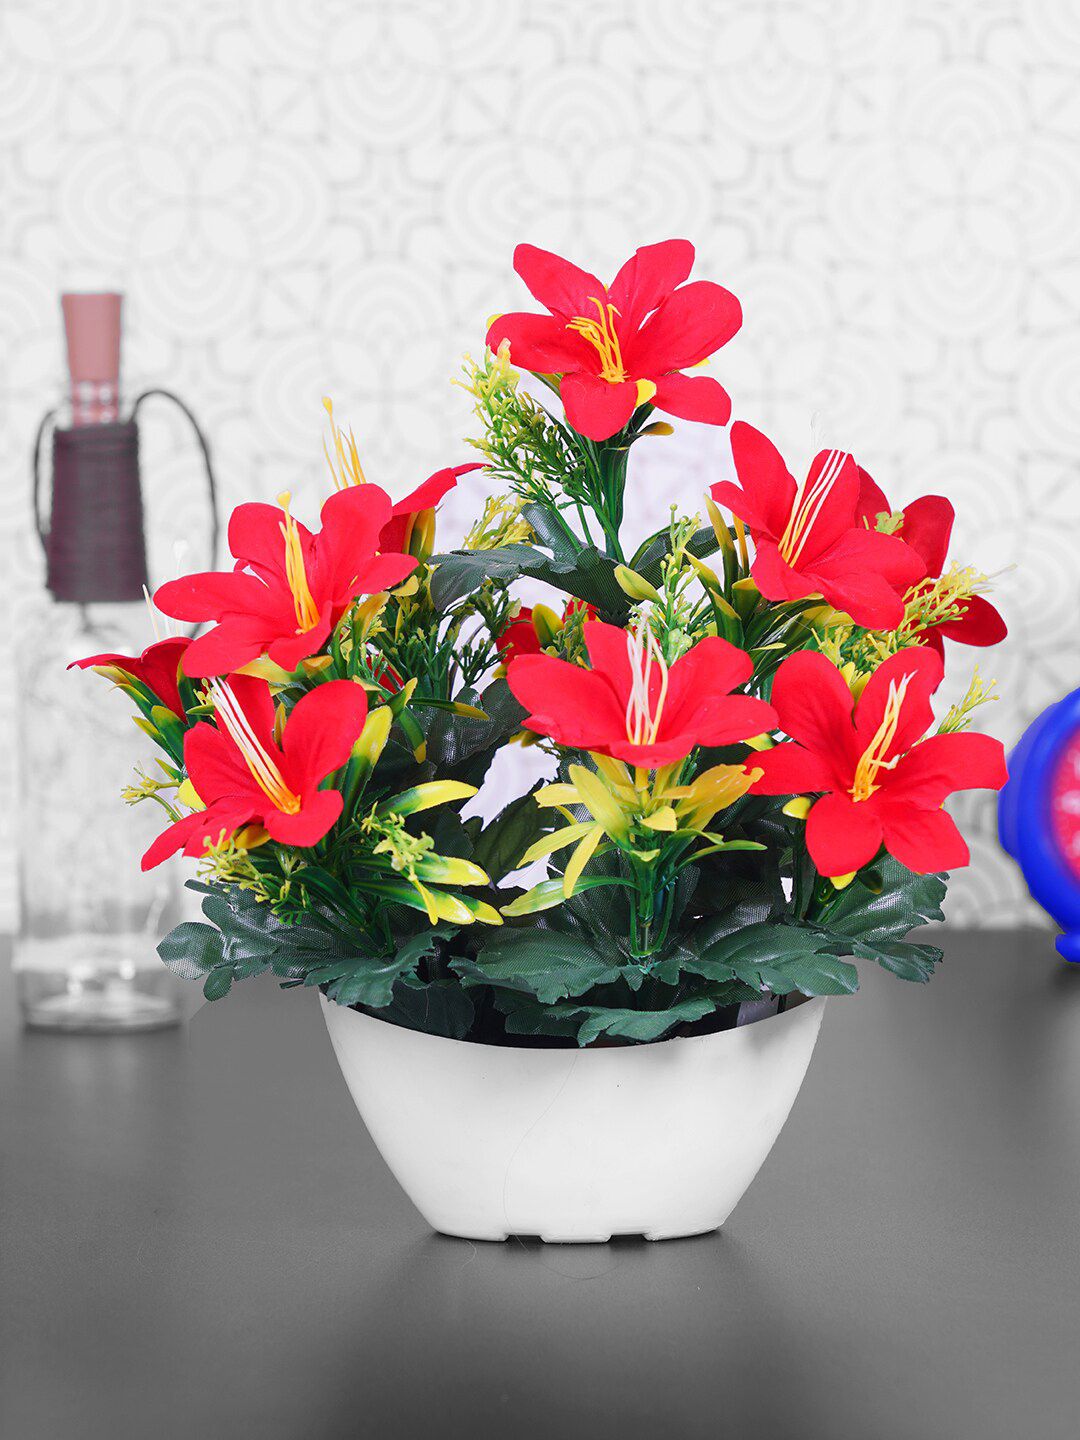 Dekorly Red & Green Artificial Flower and Plant with Pot Price in India